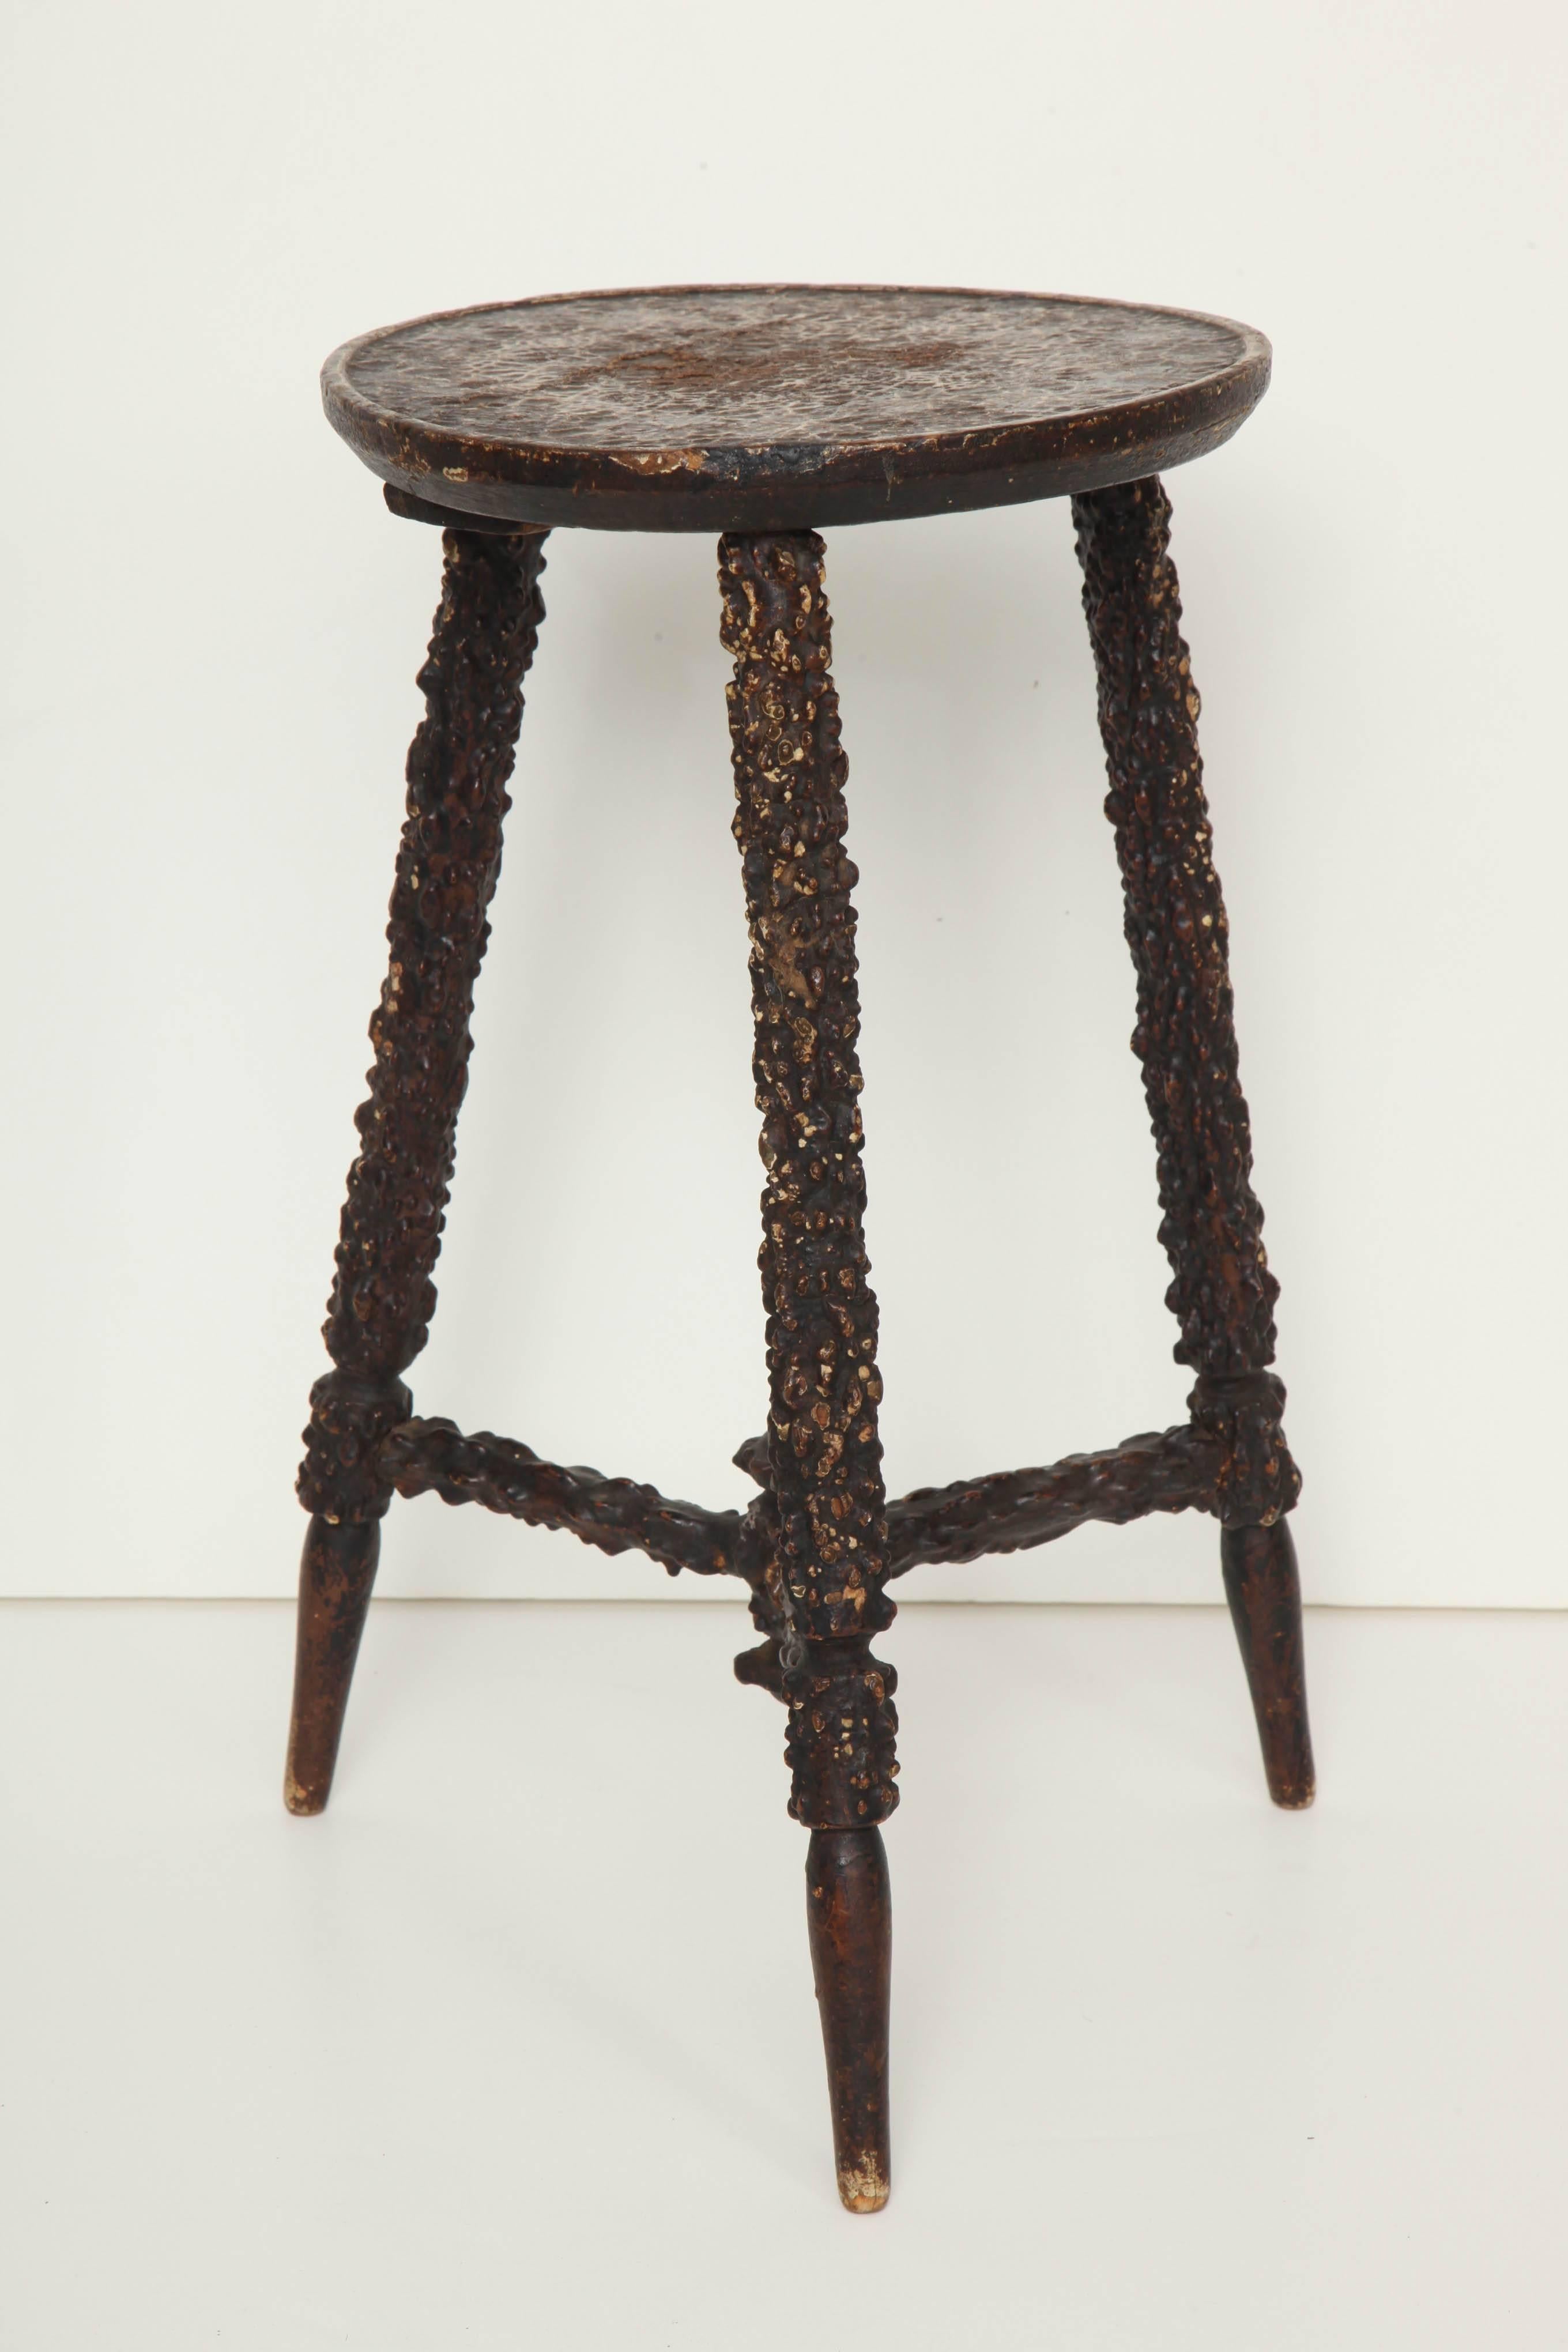 A late 19th century English rusticated three-legged stool with pressed papier mâché design on the seat and legs imitating naturally gnarled wood.